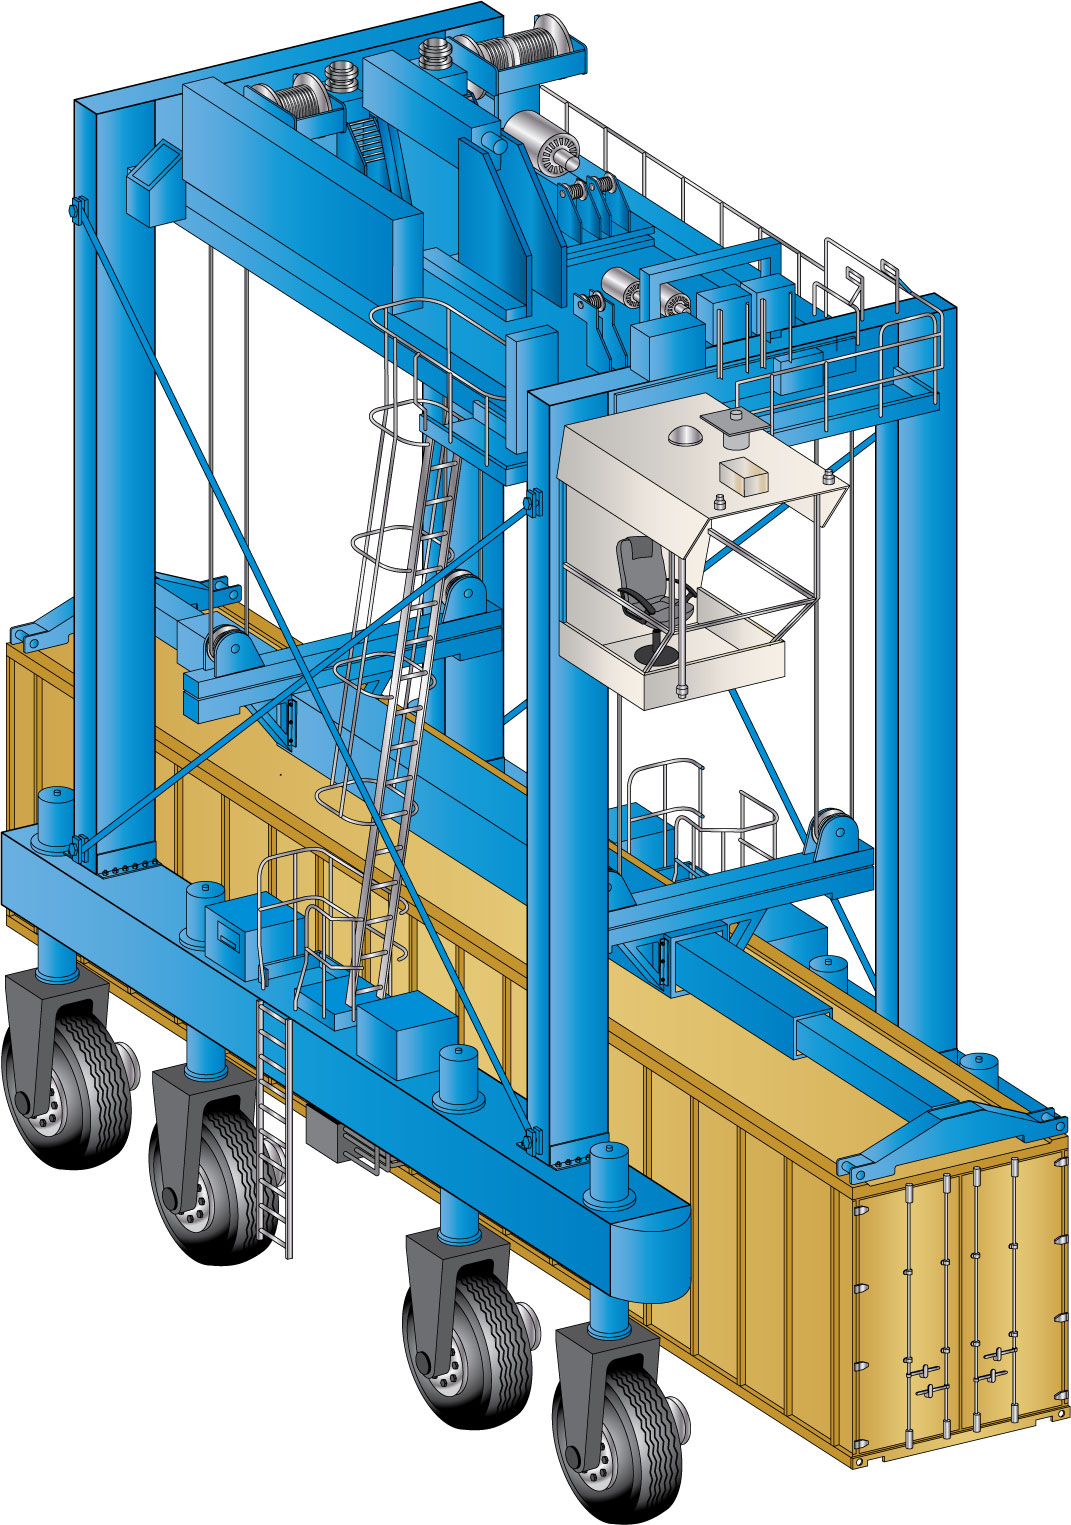 Straddle Carrier for Ocean Cargo Containers